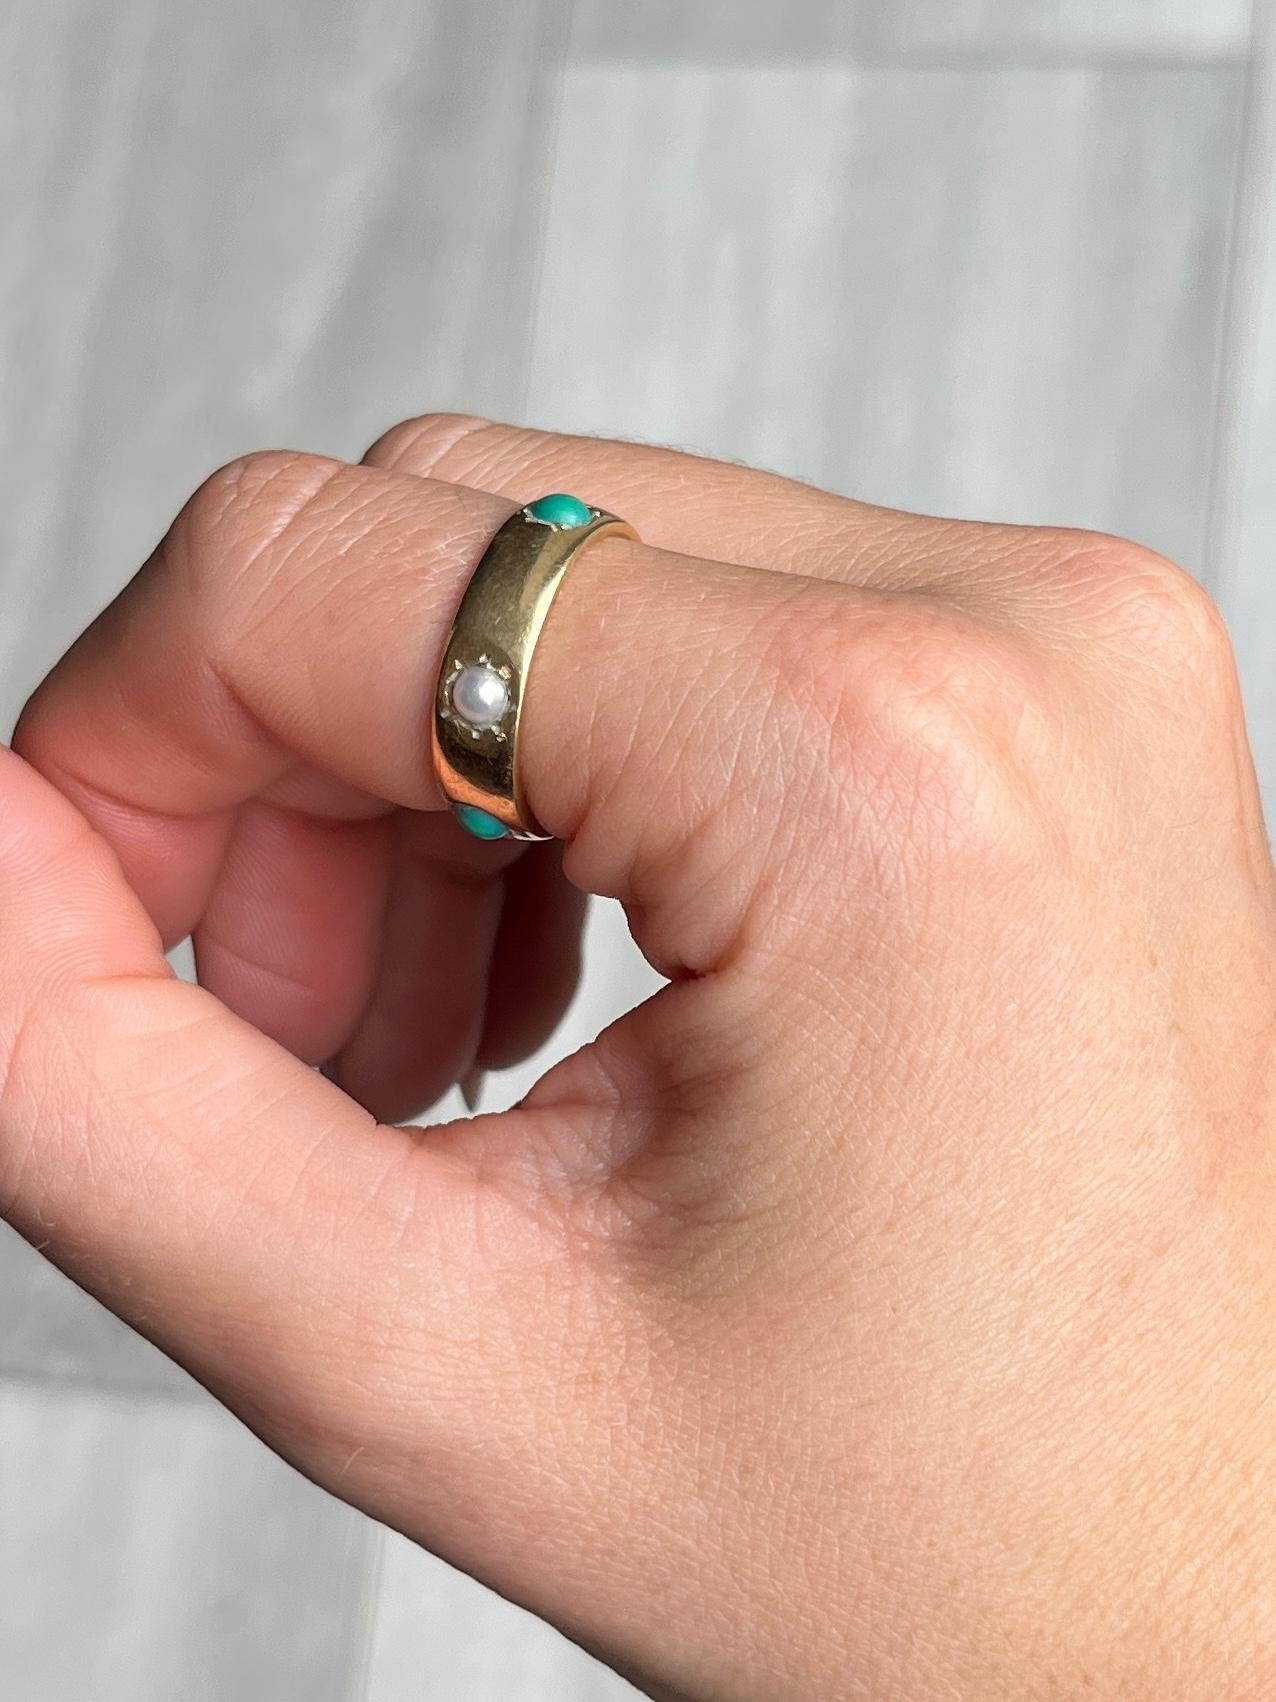 The turquoise and pearl pop next to the glossy 18ct gold and compliment each other beautifully. The chunky gold band holds three turquoise stones and three pearls. 

Ring Size: N 1/2 or 7
Band width: 6mm

Weight: 6.1g

